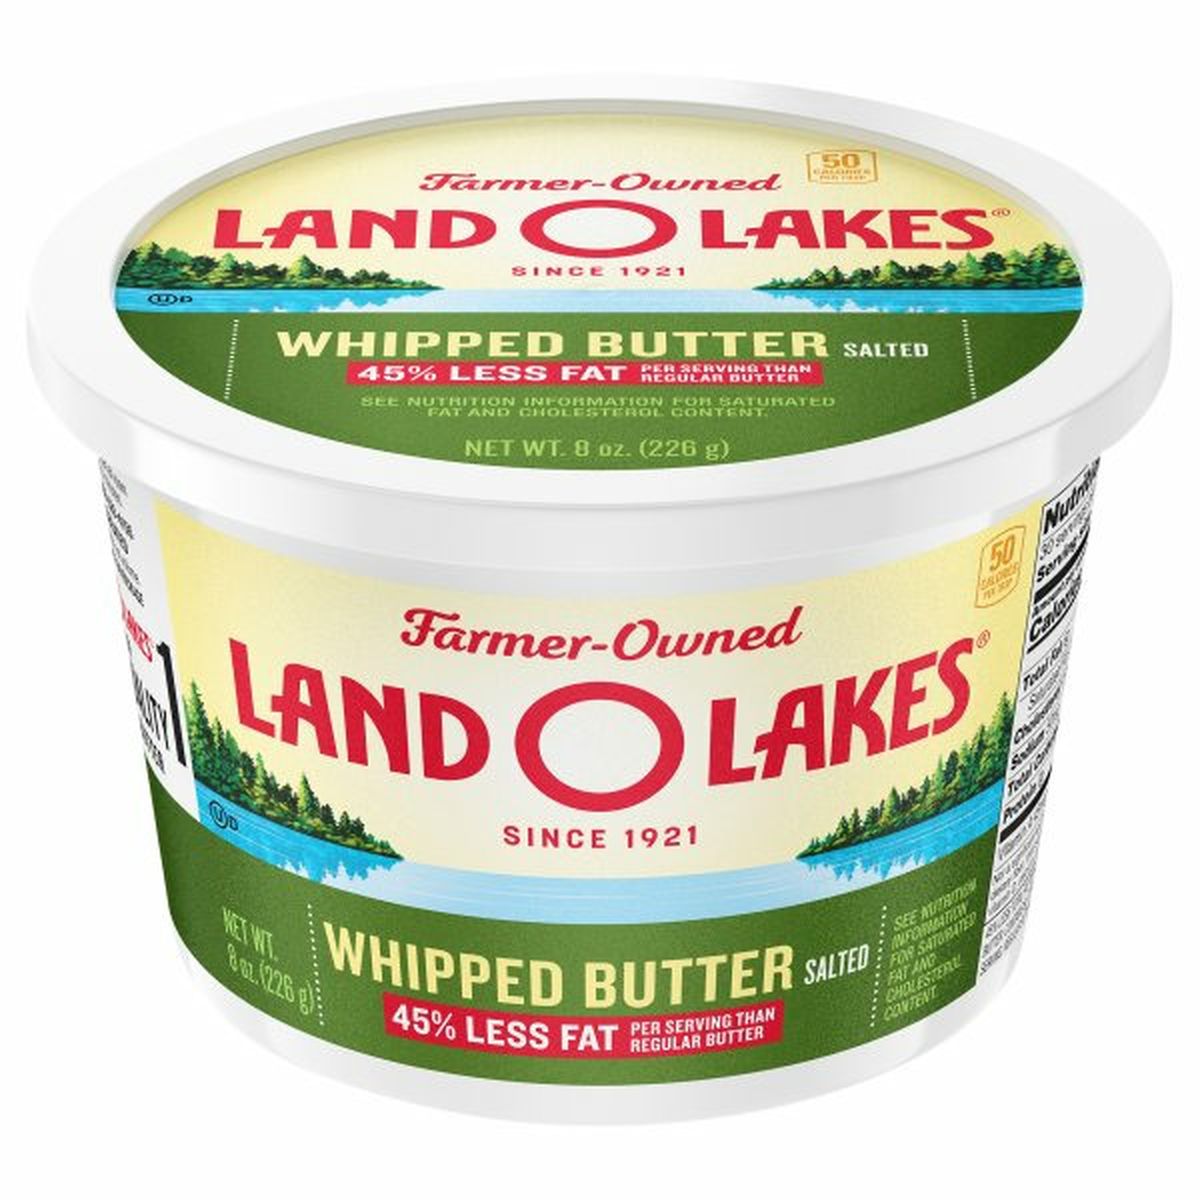 Calories in Land O Lakes Whipped Butter, Salted